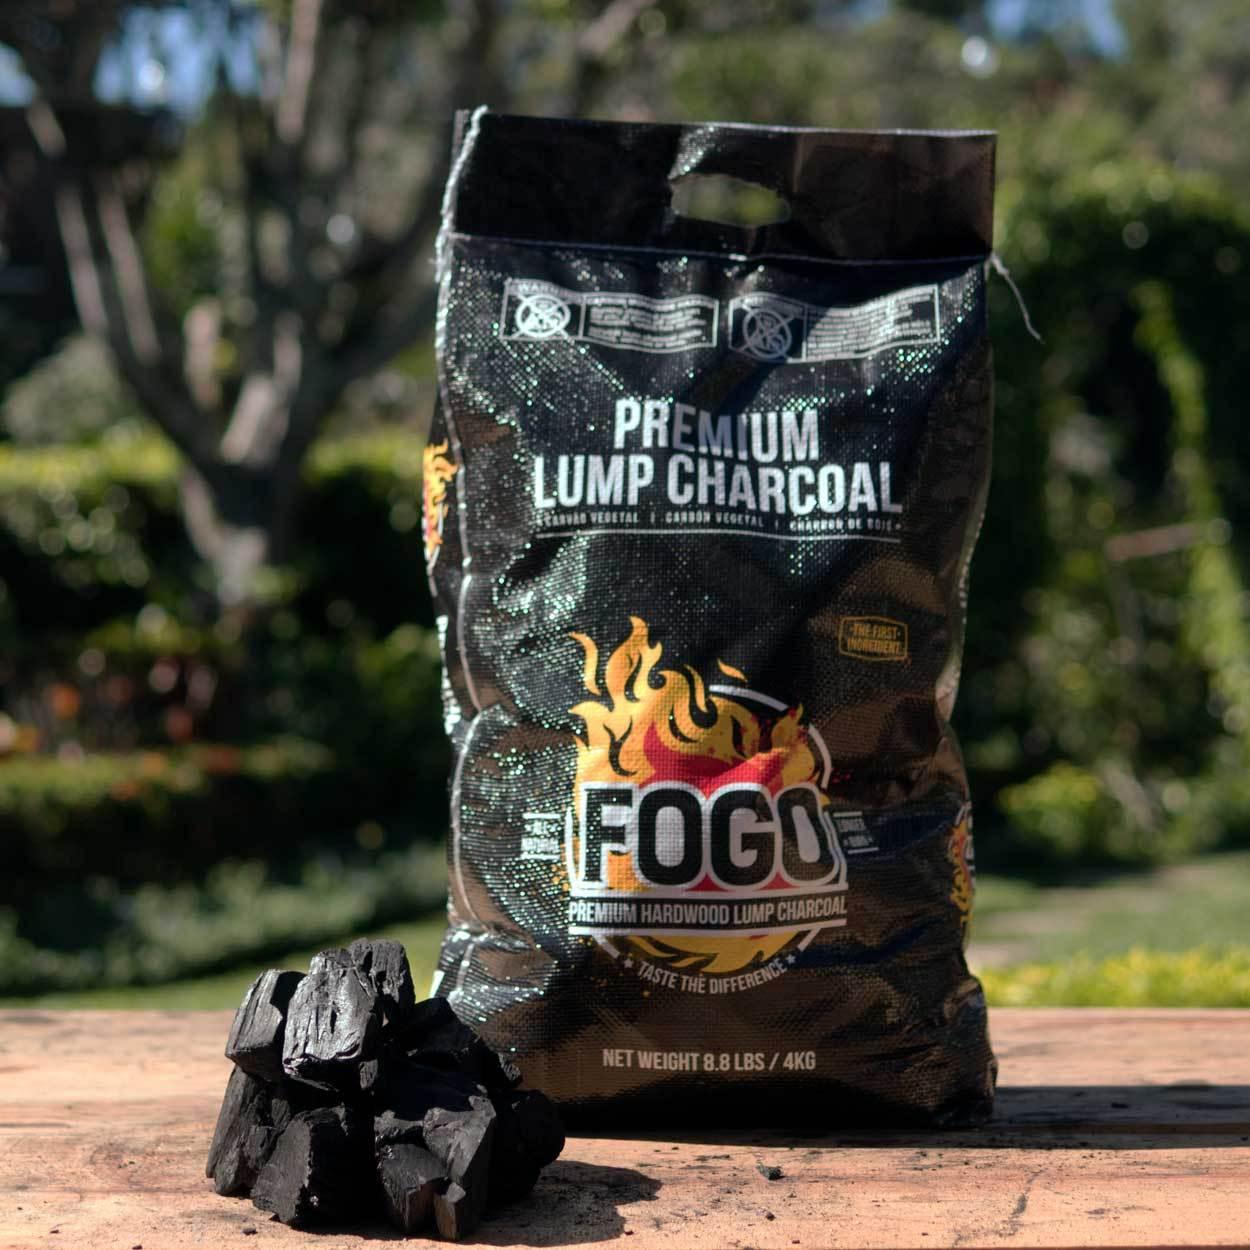 FOGO Super Premium Hardwood Lump Charcoal, Natural, Large Sized Lump  Charcoal for Grilling and Smoking, Restaurant Quality, 17.6 Pound Bag,  2-Pack - Walmart.com